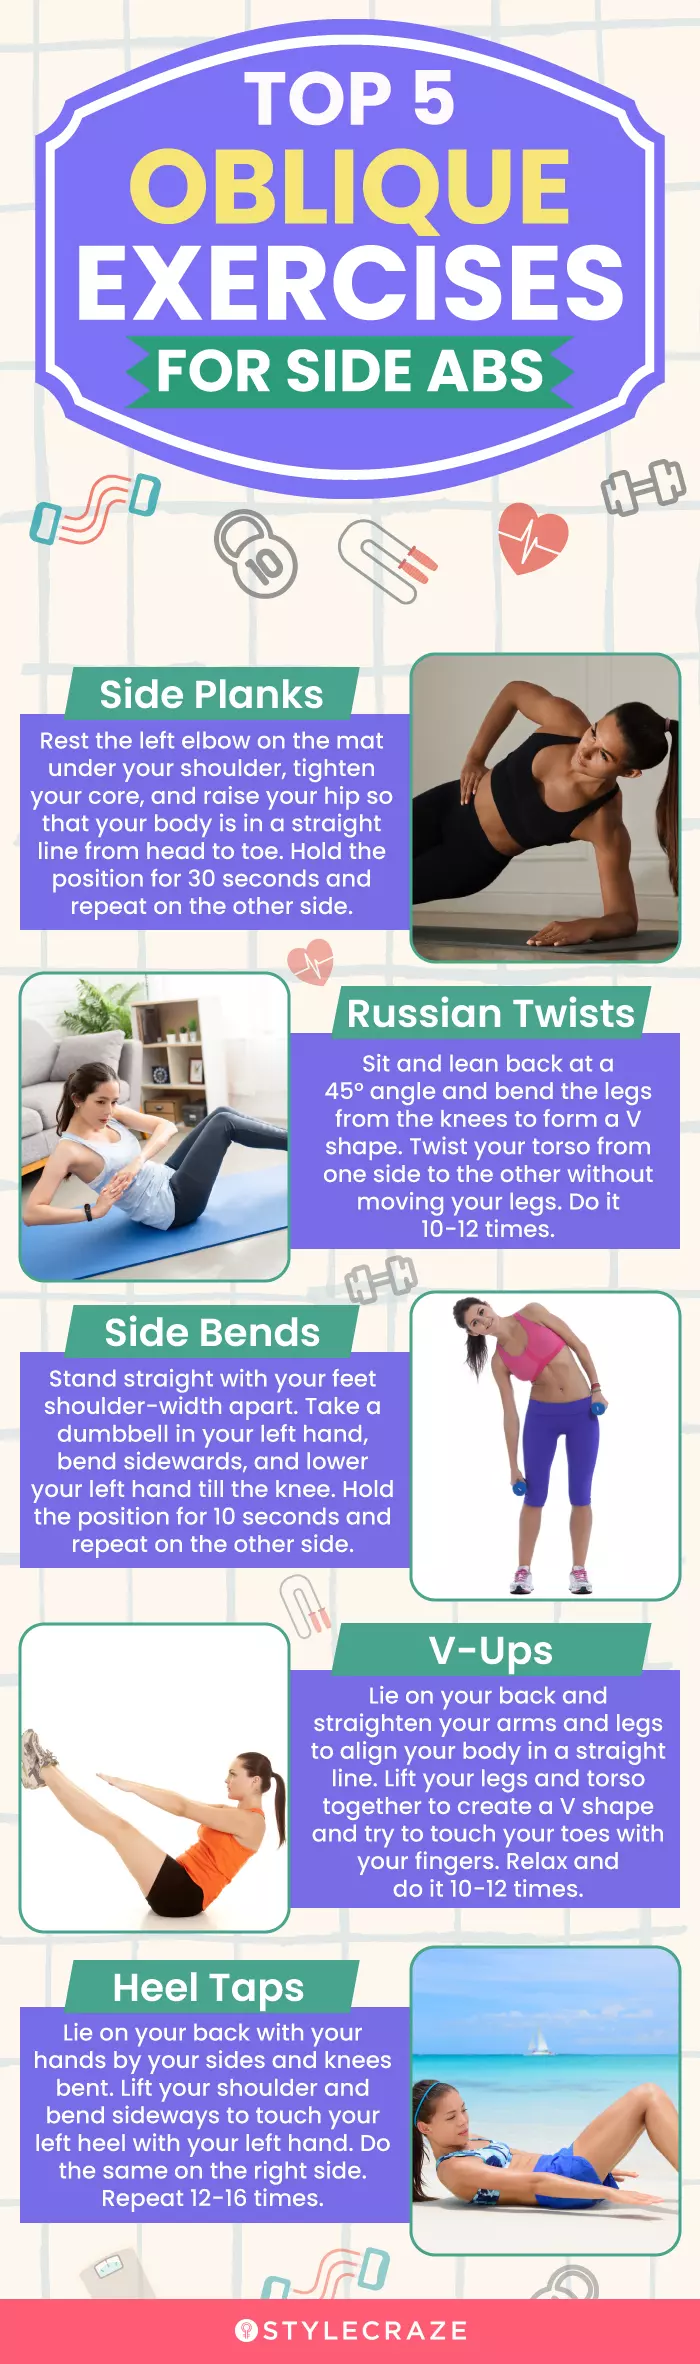 top 5 oblique exercises for side abs (infographic)